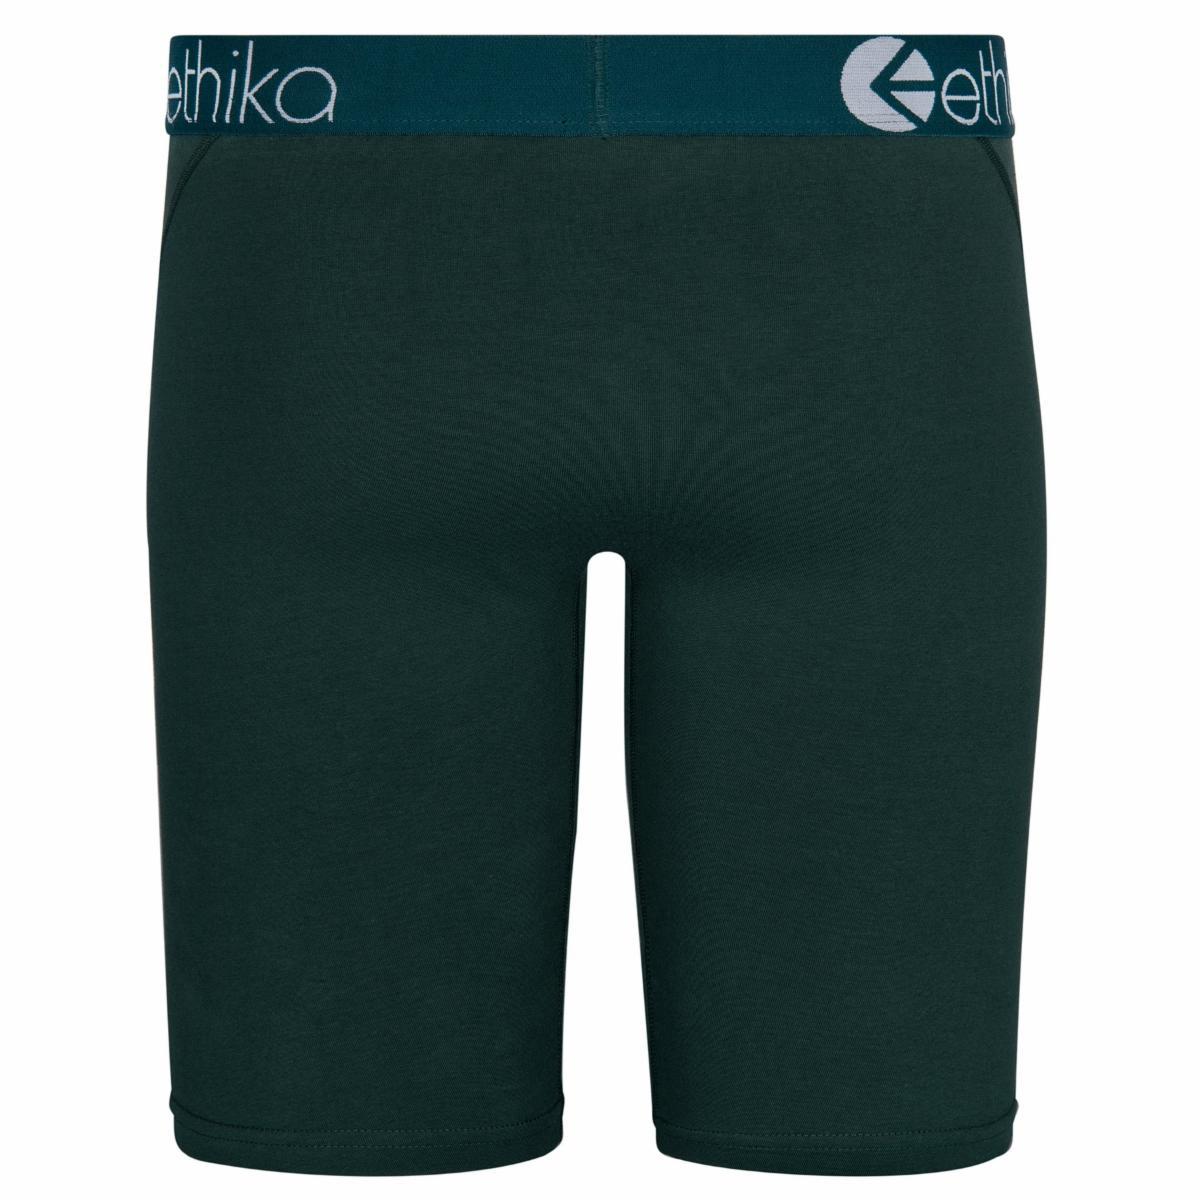 Victory Green Ethika Staple Boxers Back